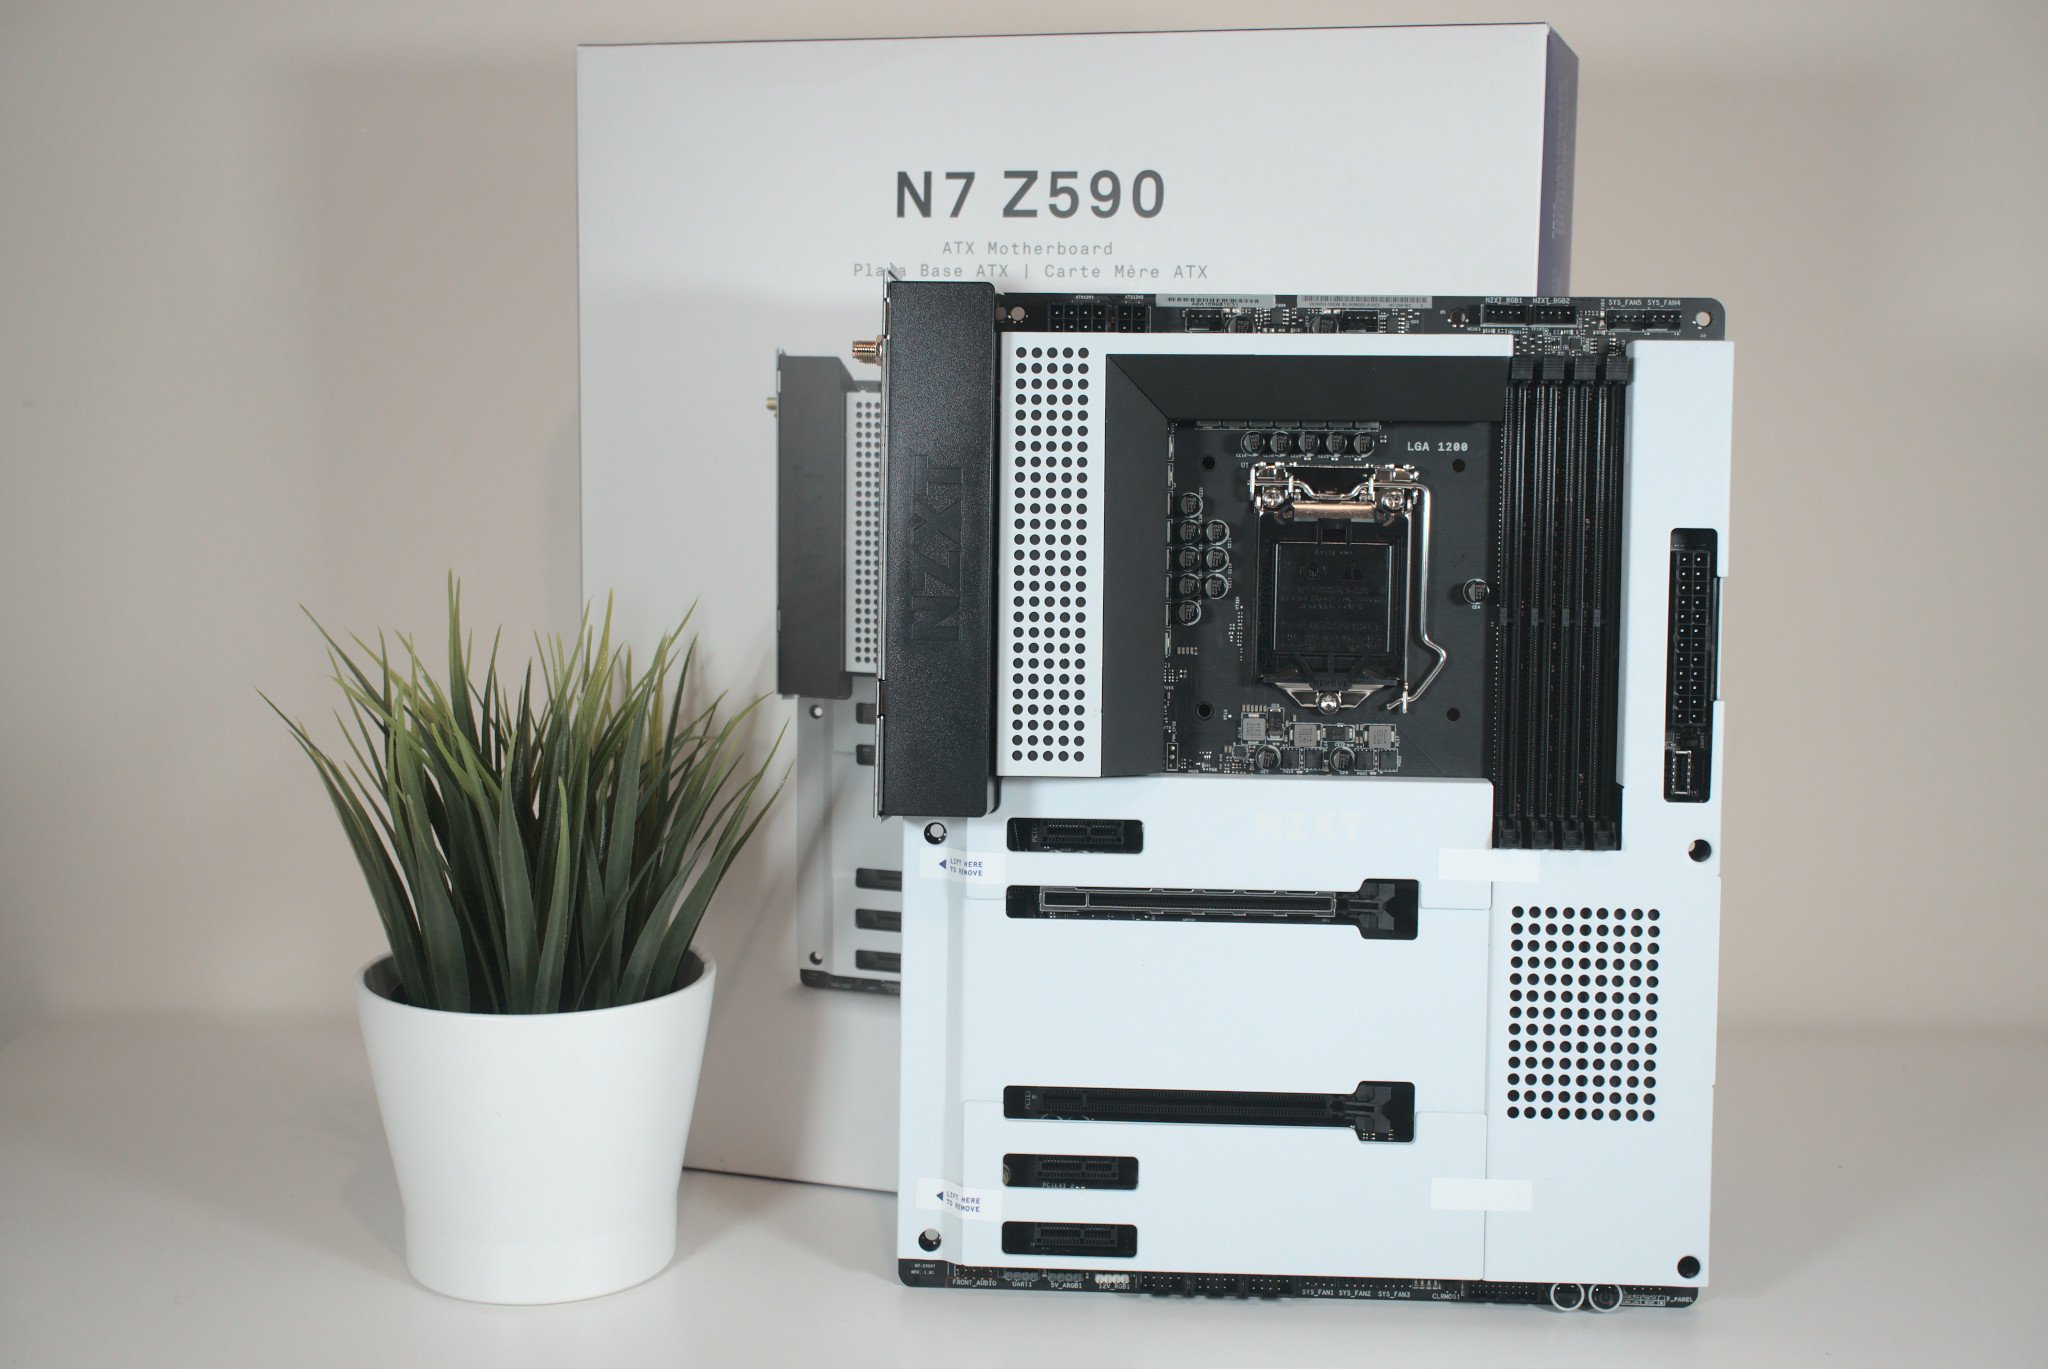 NZXT N7 Z590 review: The best-looking Intel motherboard receives a few  upgrades